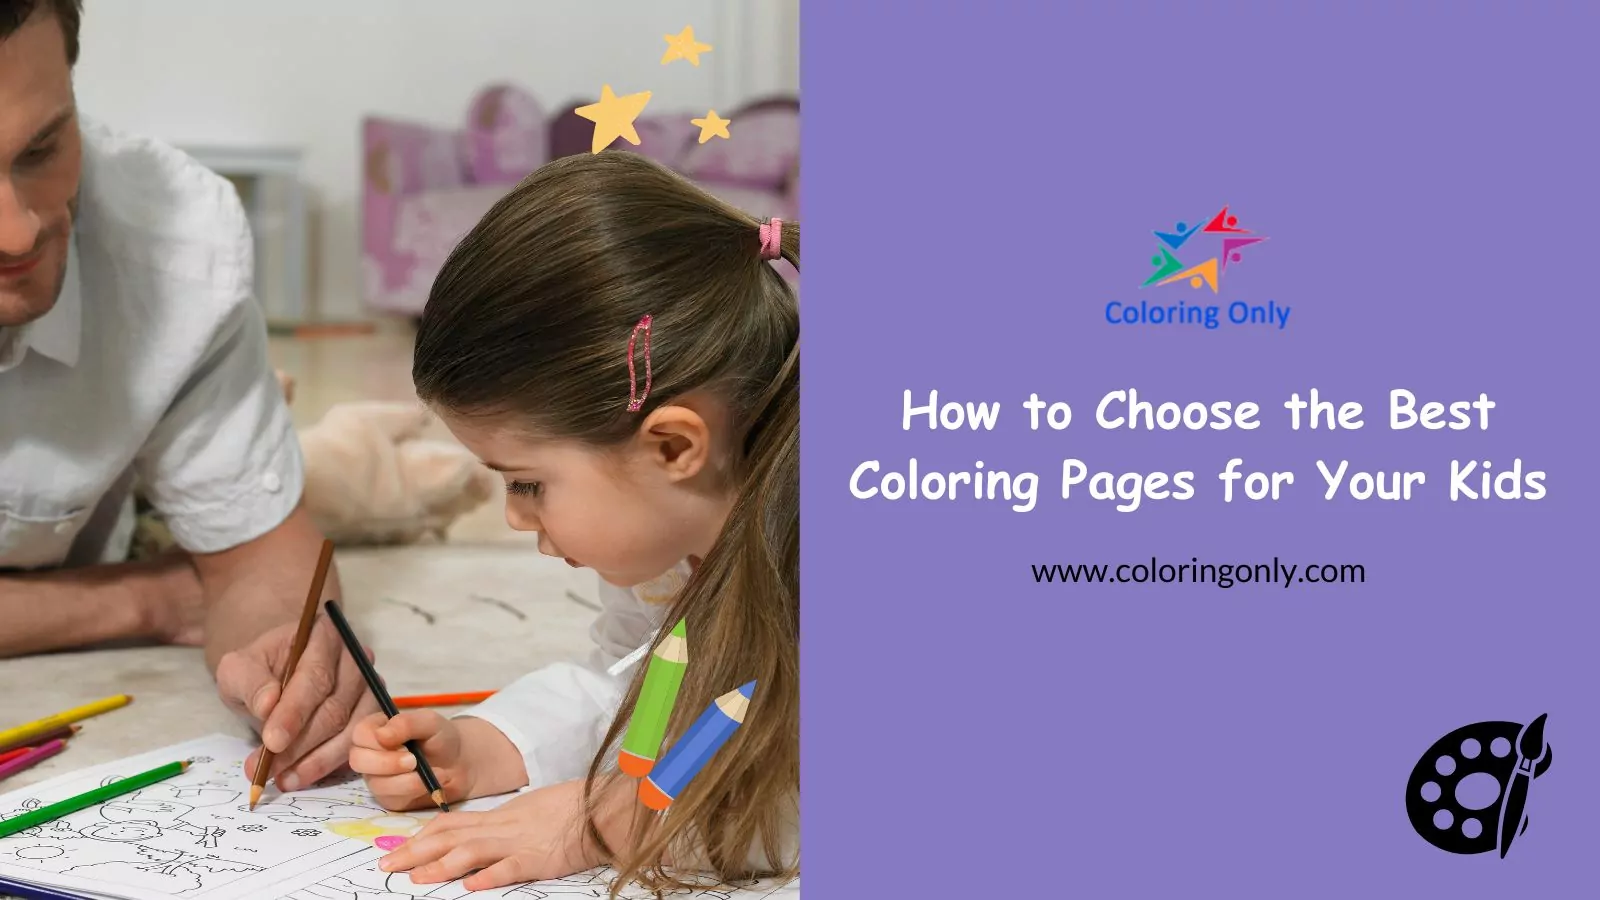 How to Choose the Best Coloring Pages for Your Kids